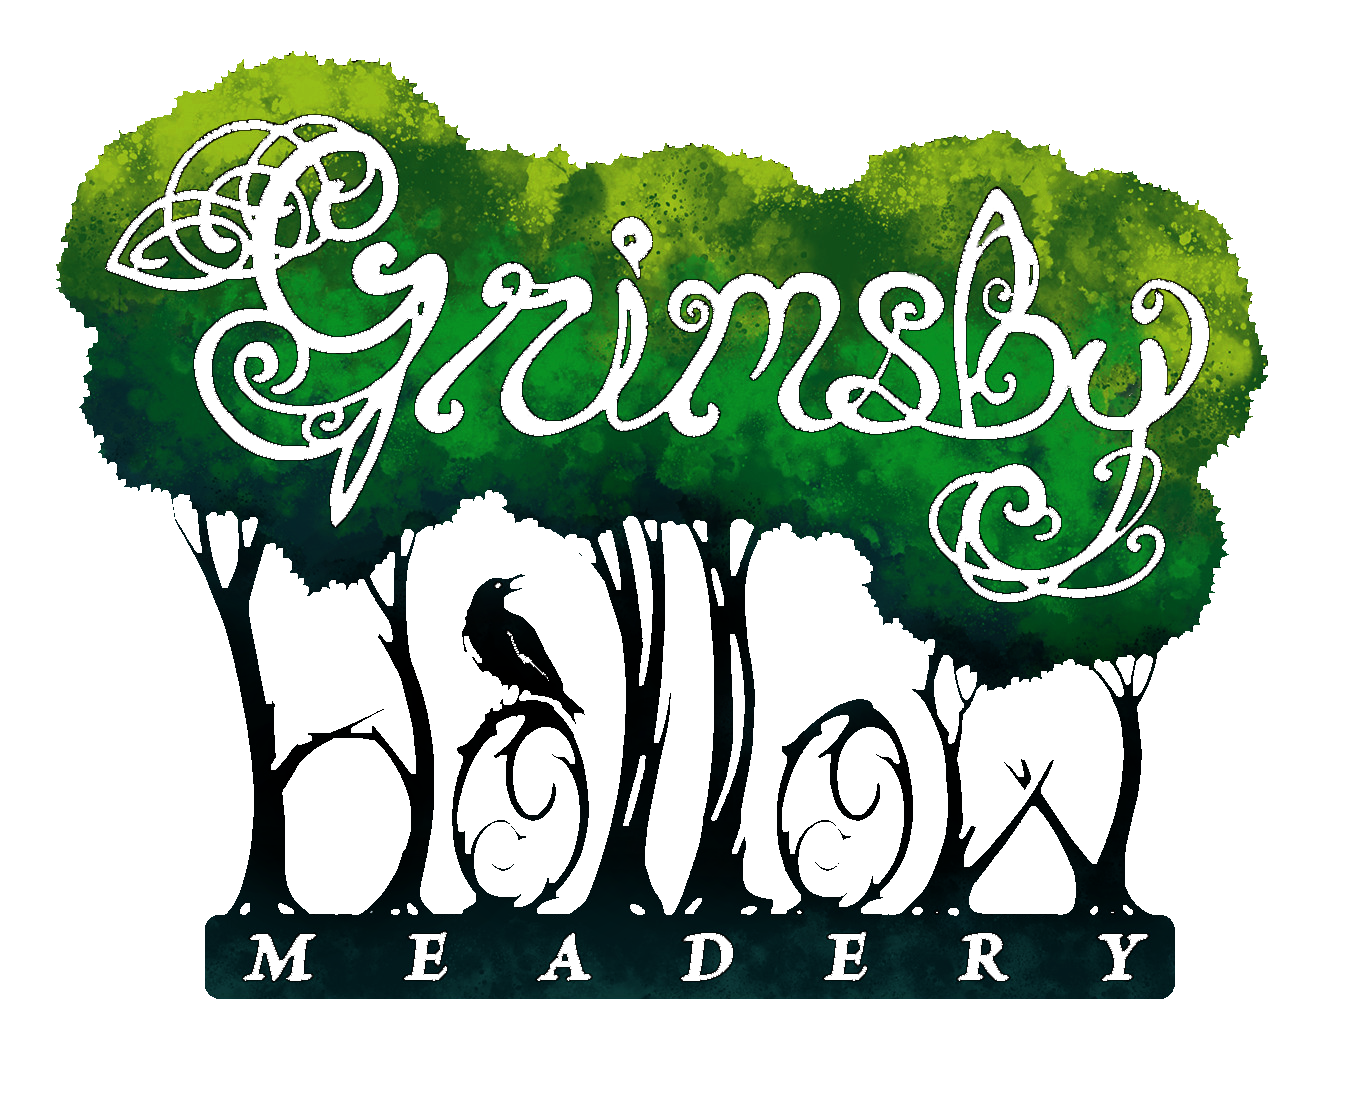 Grimsby Hollow Meadery